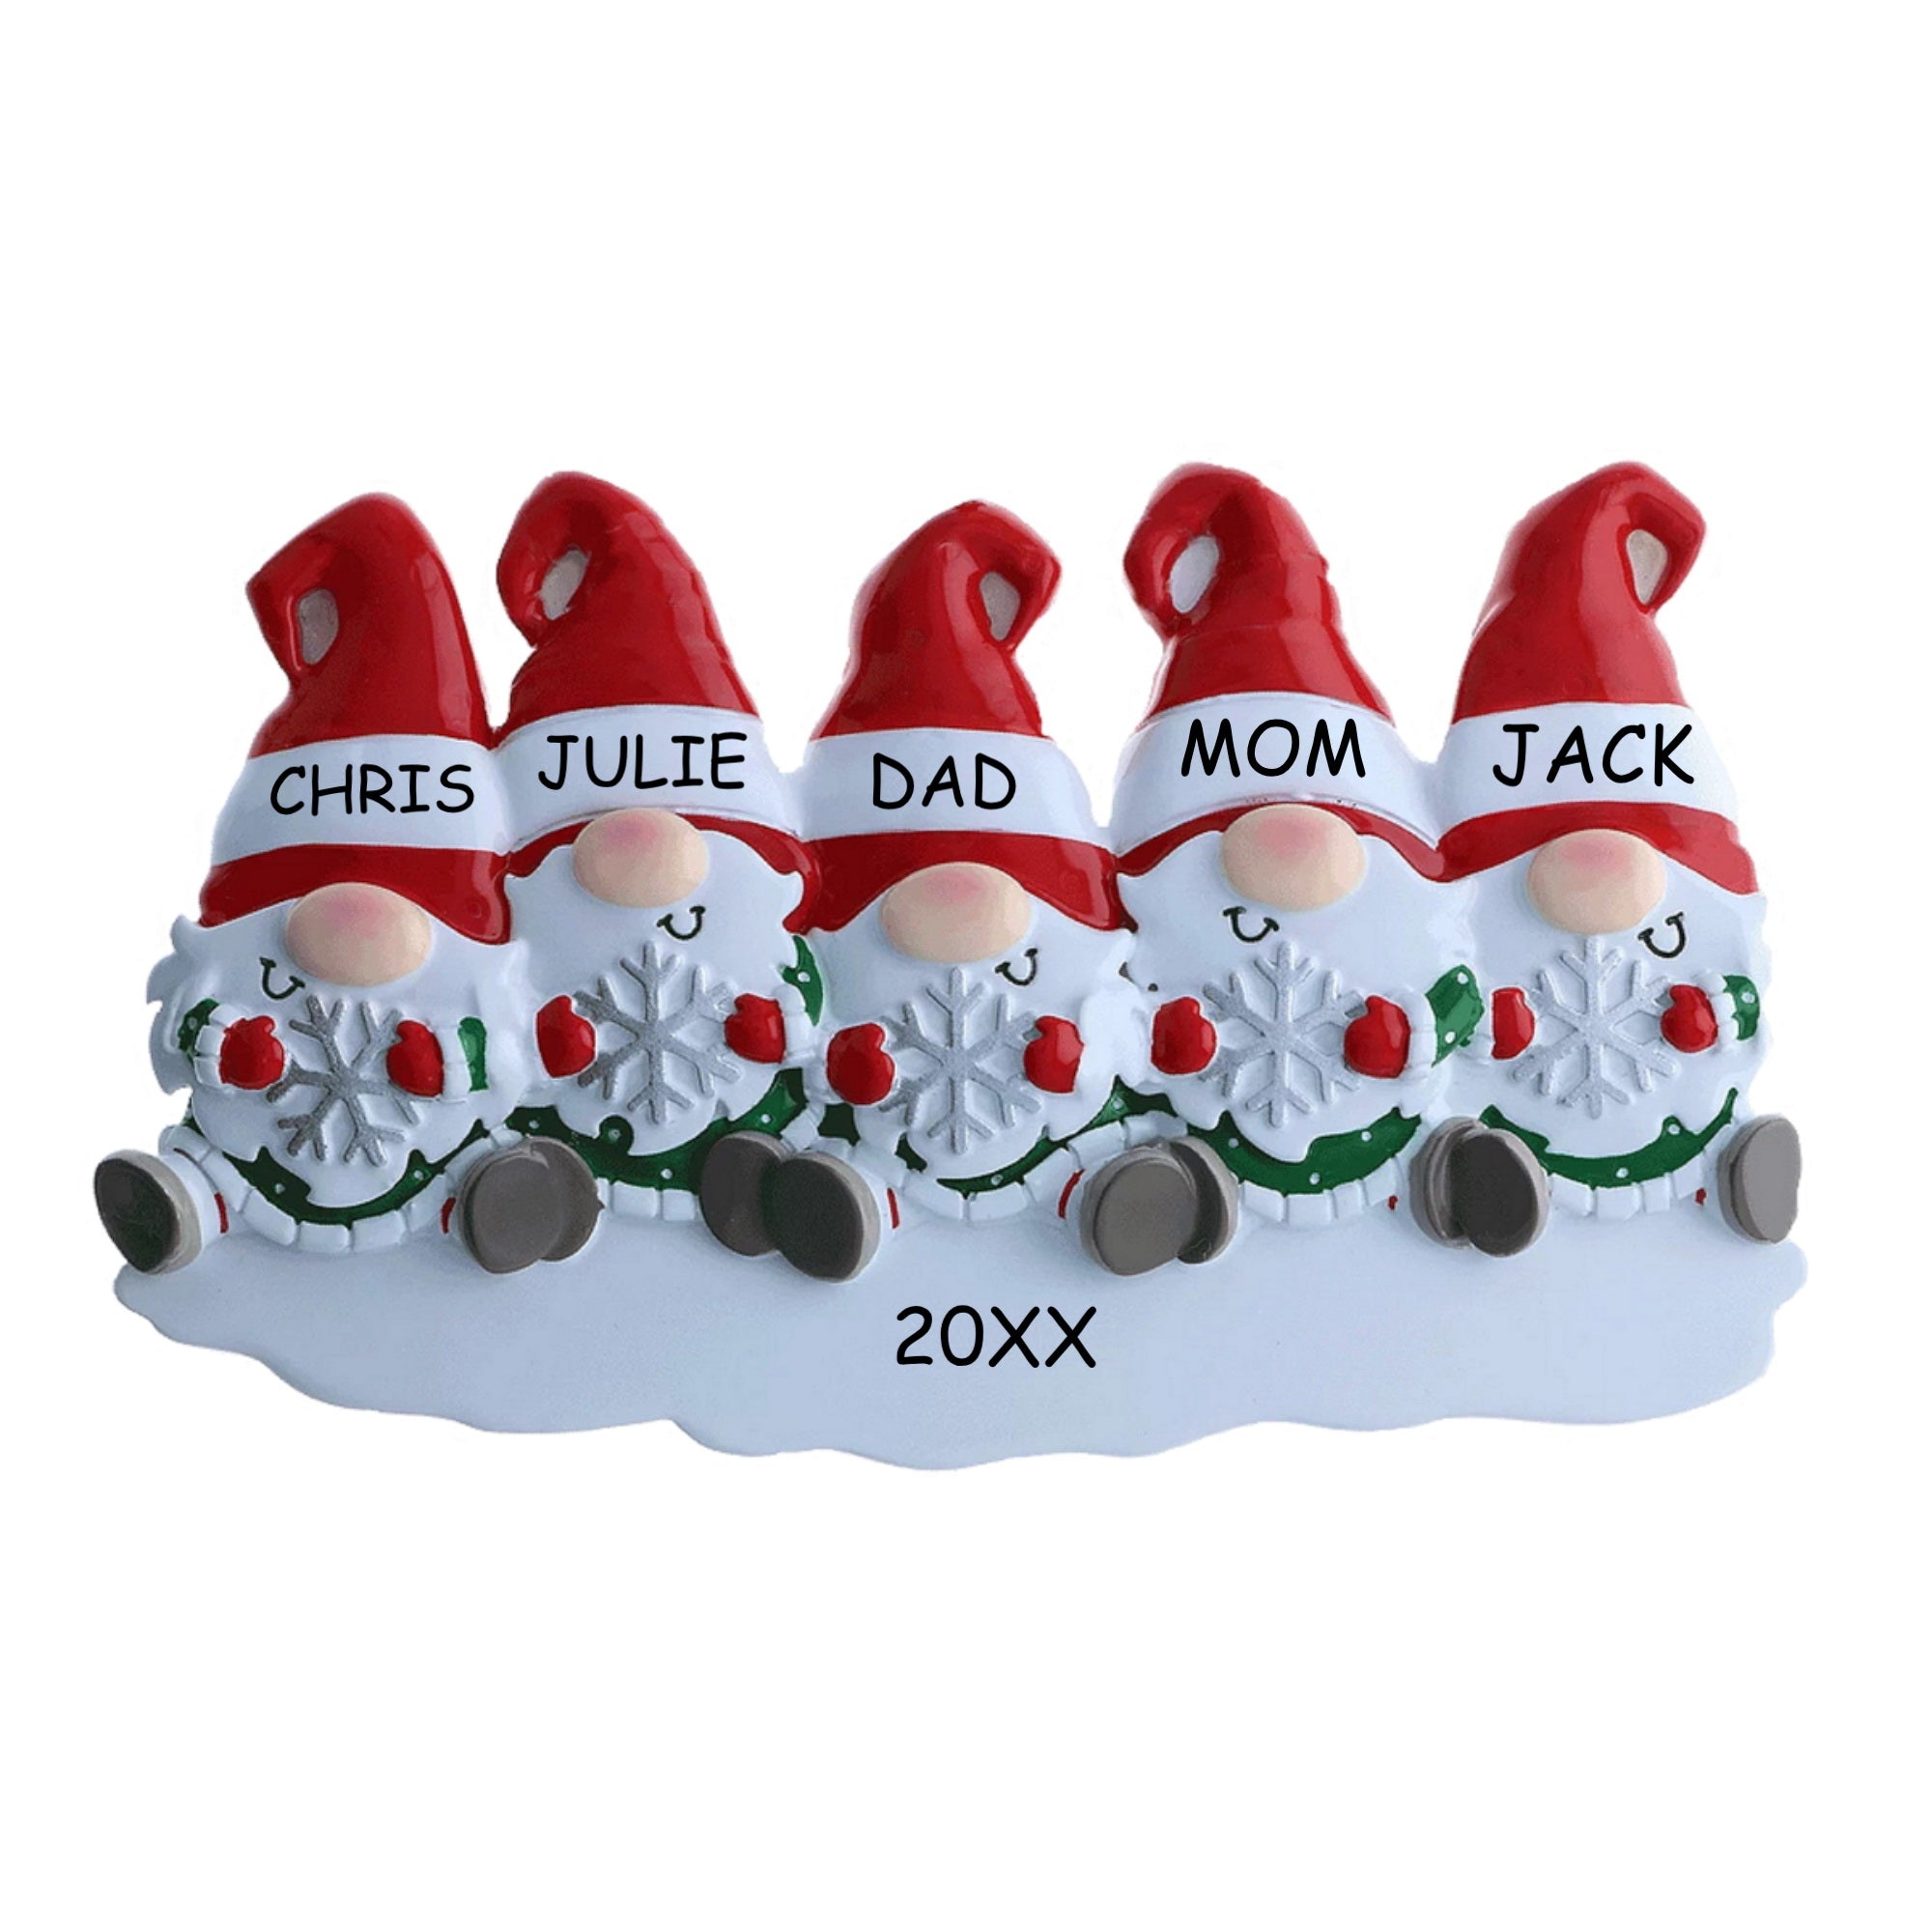 Personalized Gnome Family Christmas Ornament - Family of 5